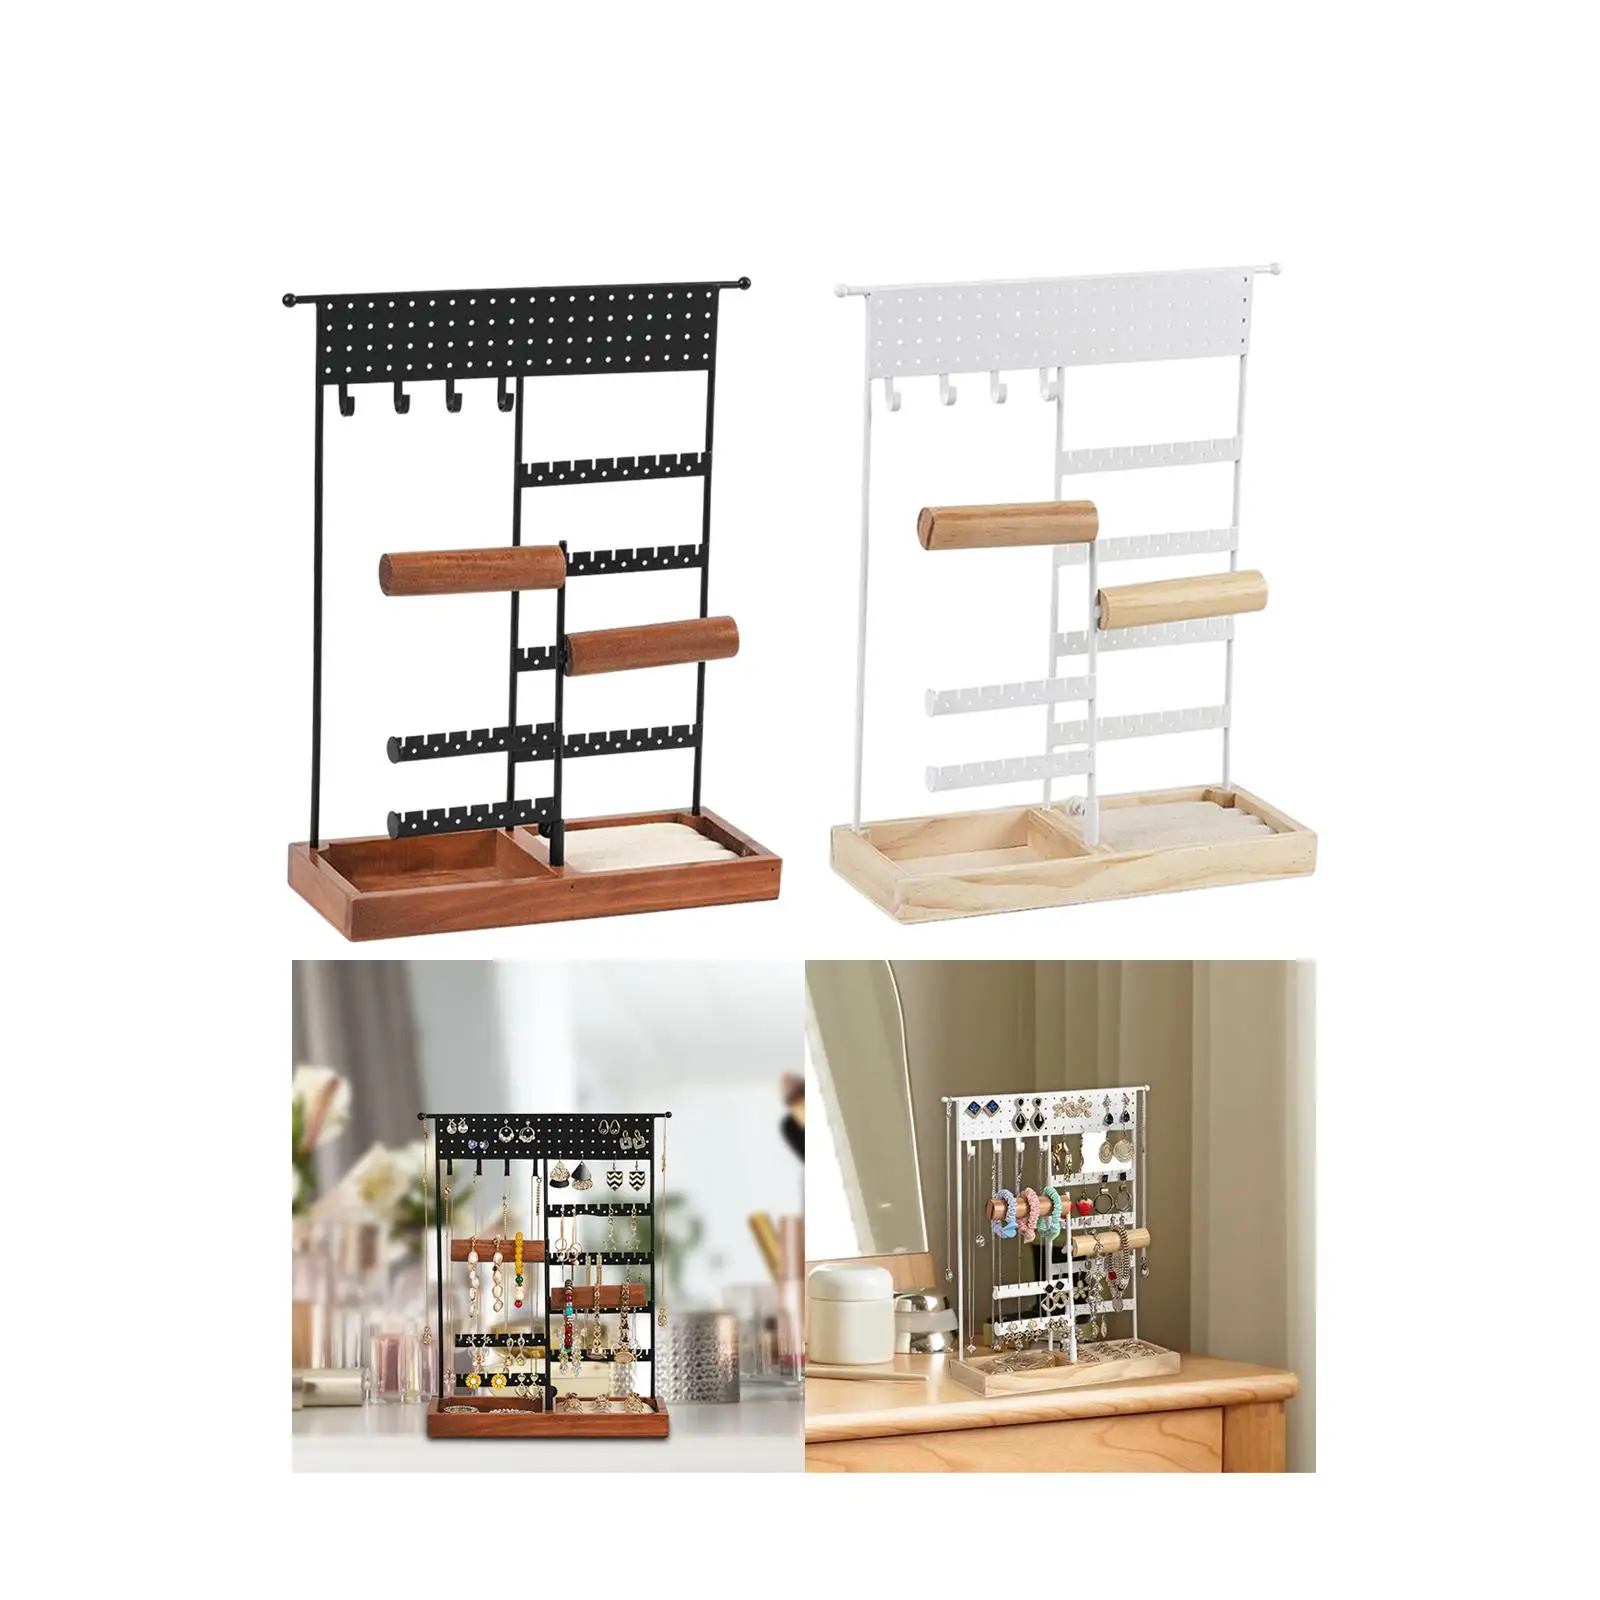 Jewelry Display Stand with Wooden Tray Elegant Desktop Necklace Organizer Earring Holder for Earrings/ Bracelets/ Necklaces